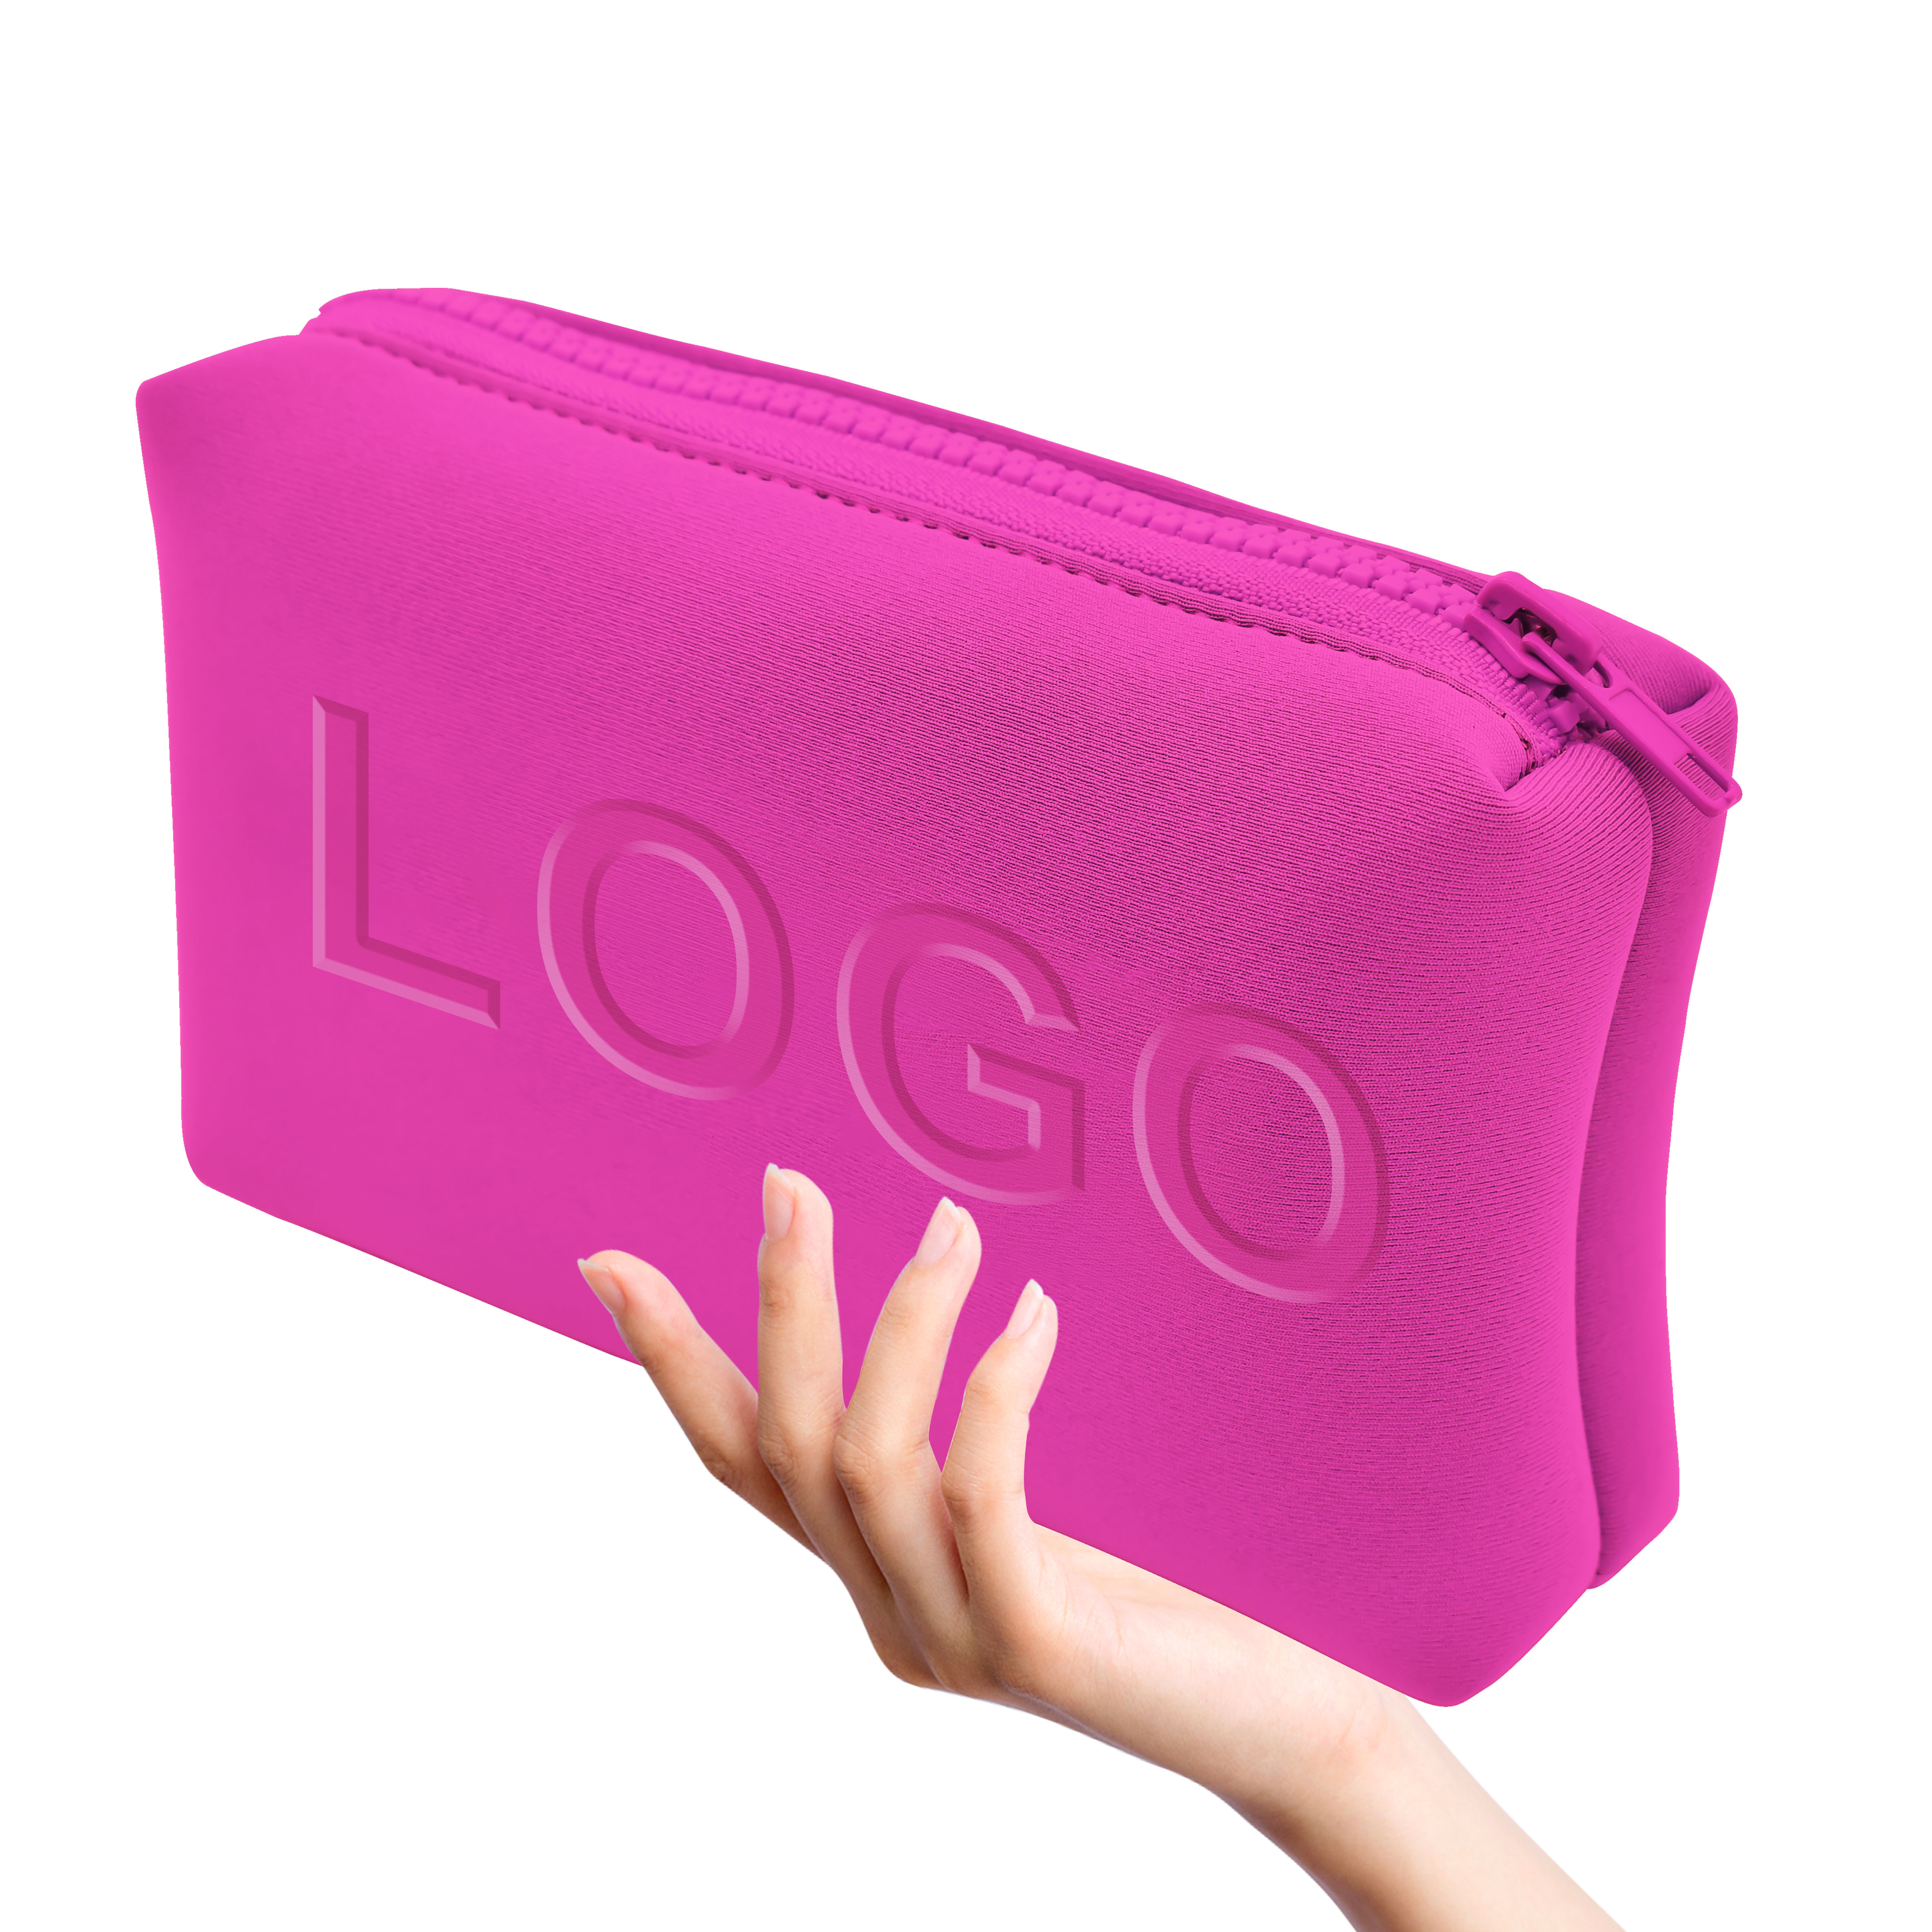 Looking for a custom makeup bag to organize all your beauty essentials?